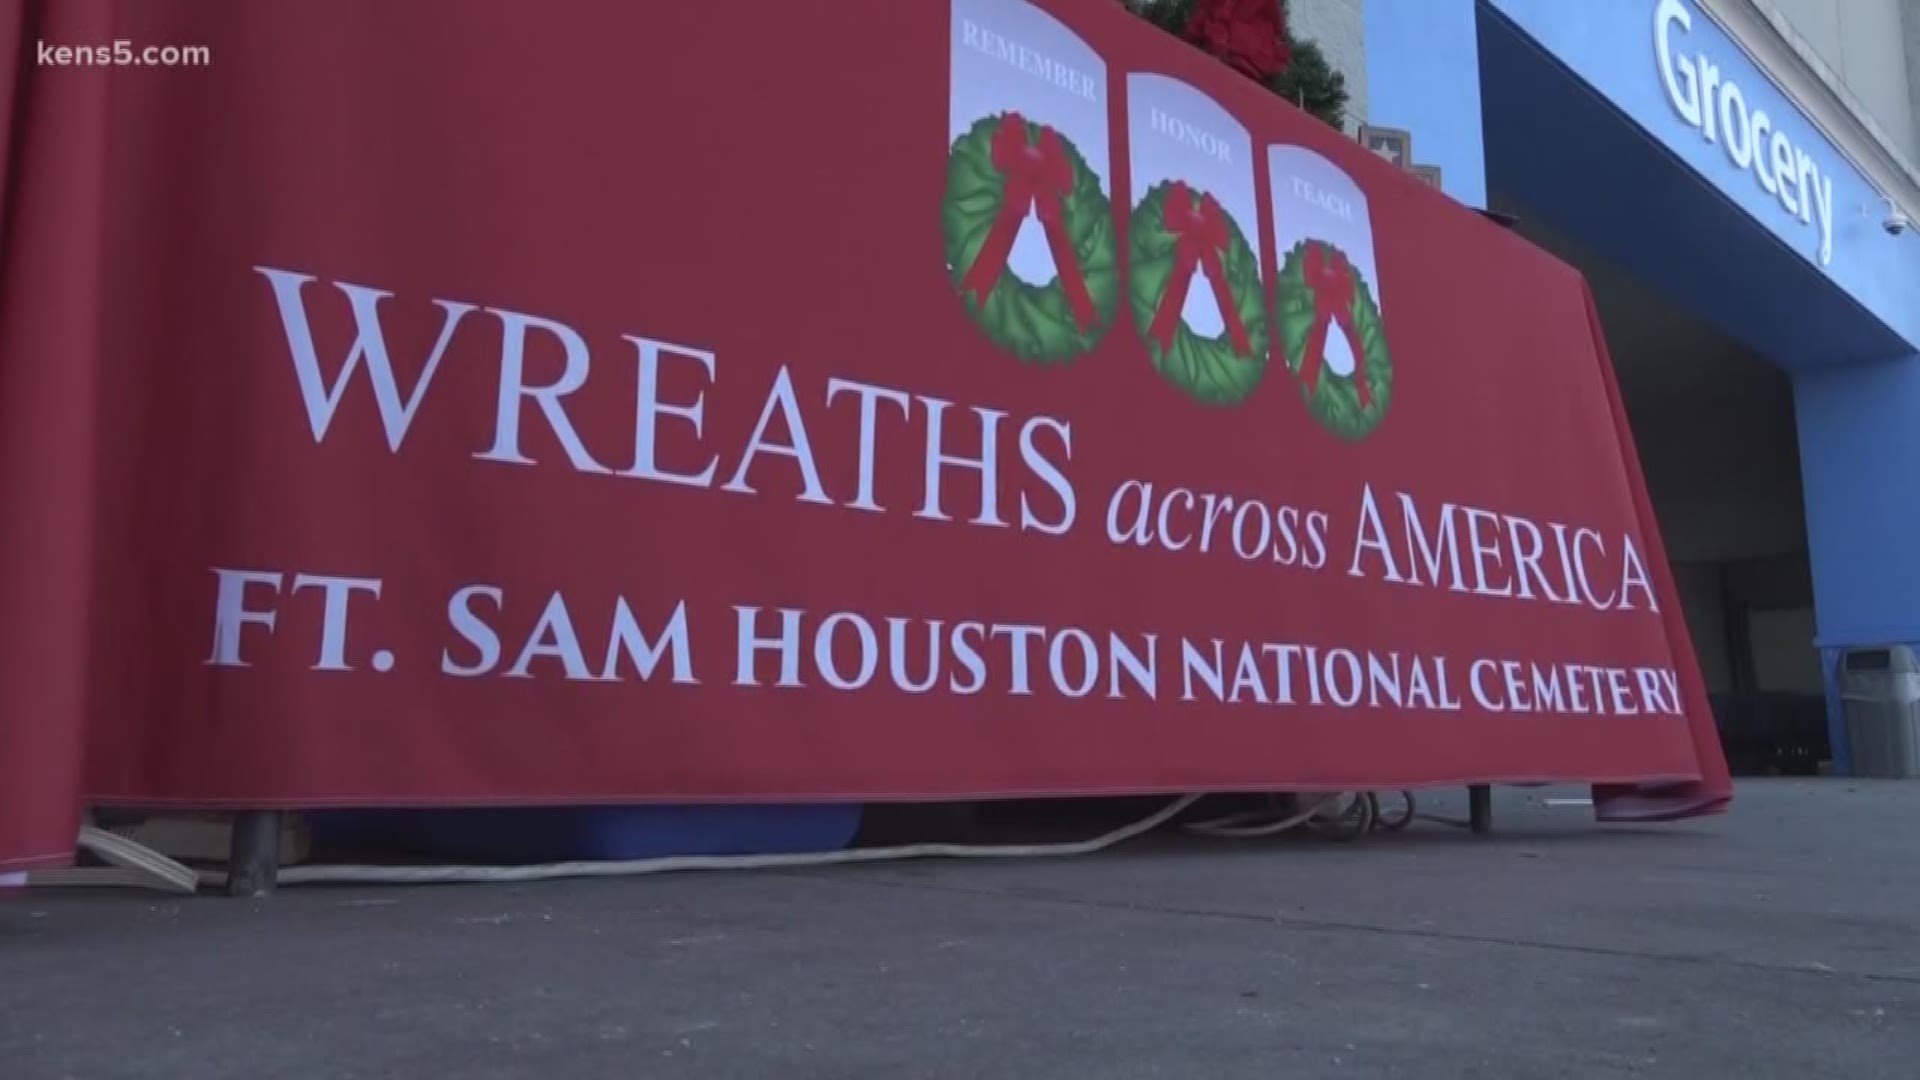 Every year, volunteers set up at various locations in San Antonio to raise funds for Wreaths Across America. One woman has devoted a decade to supporting the cause.